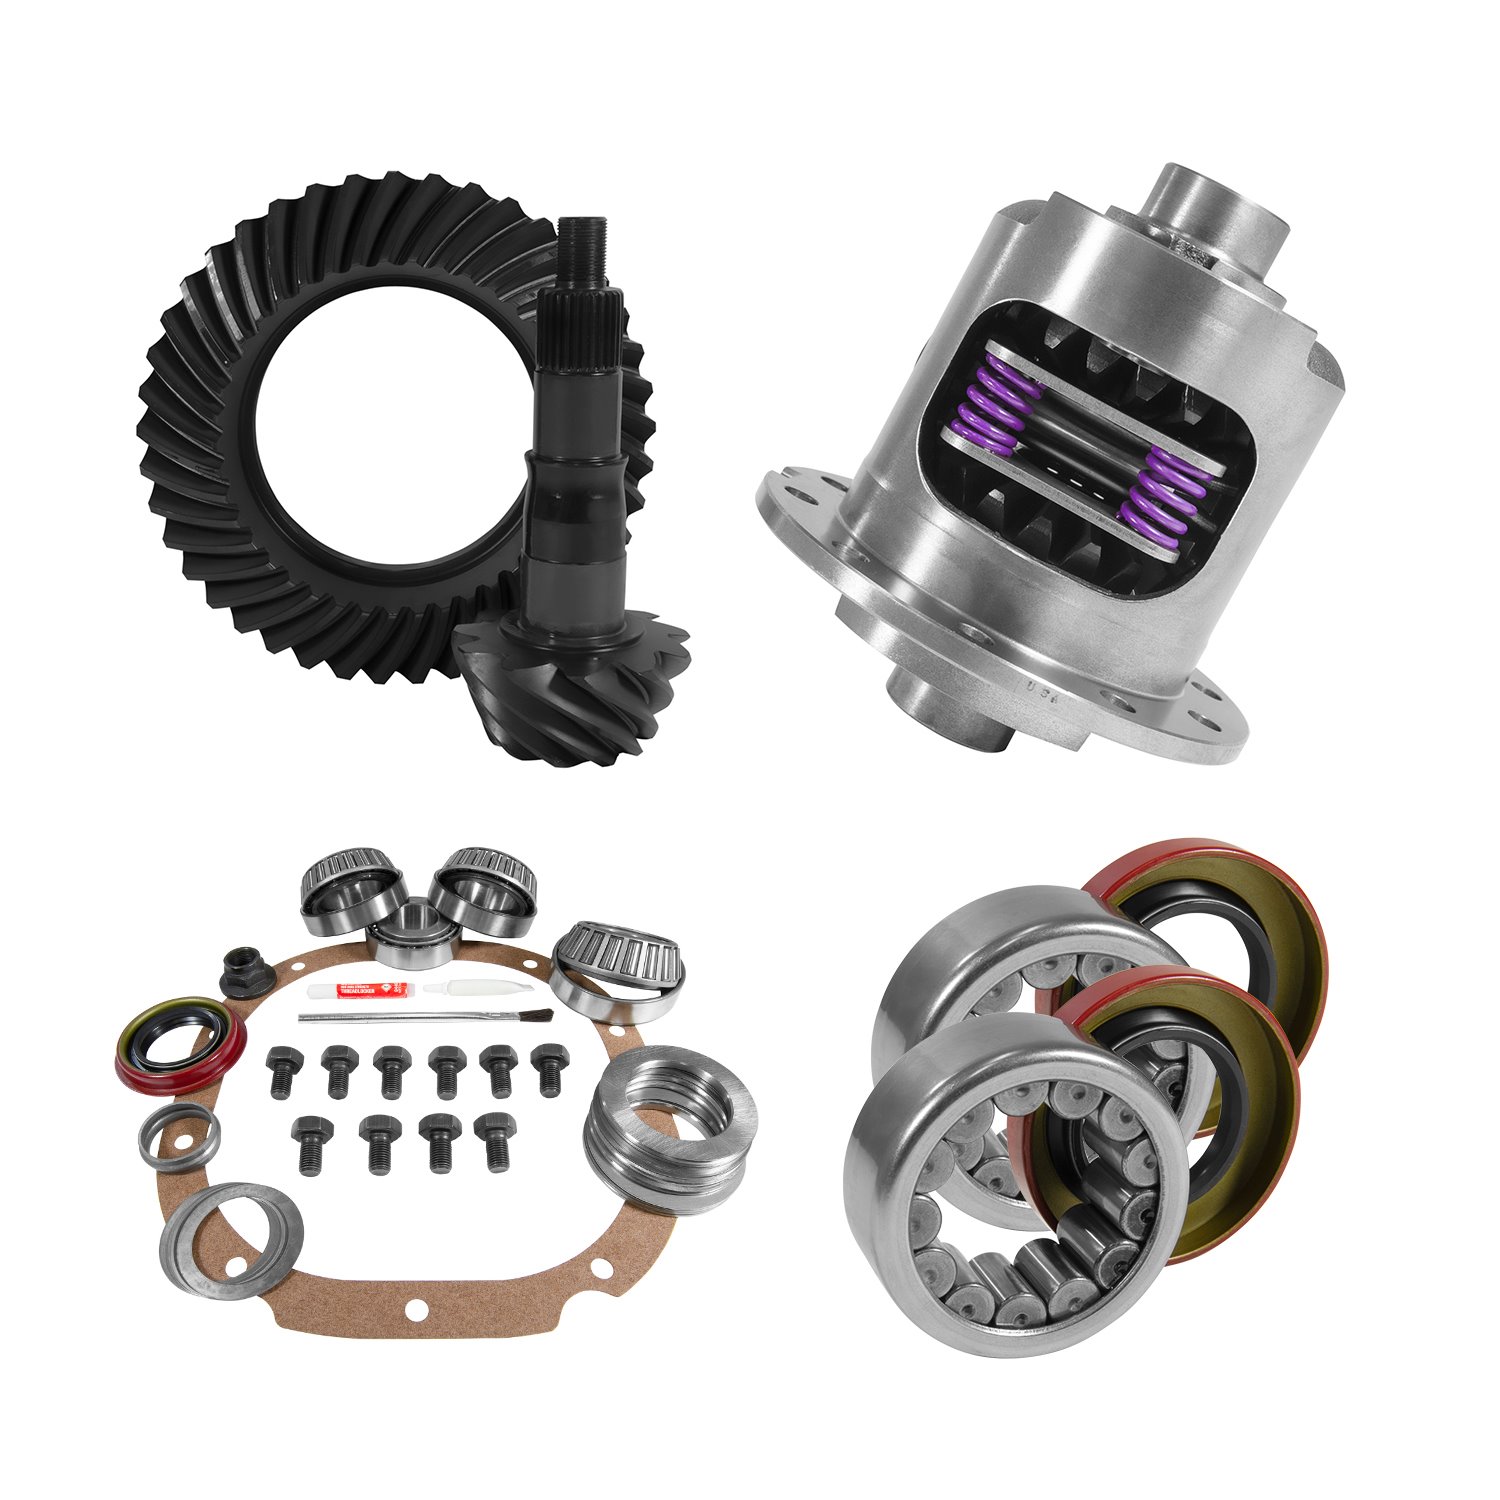 USA Standard 10775 8.8 in. Ford 4.88 Rear Ring & Pinion Install Kit, 31Spl Posi, 2.99 in. Axle Bearings